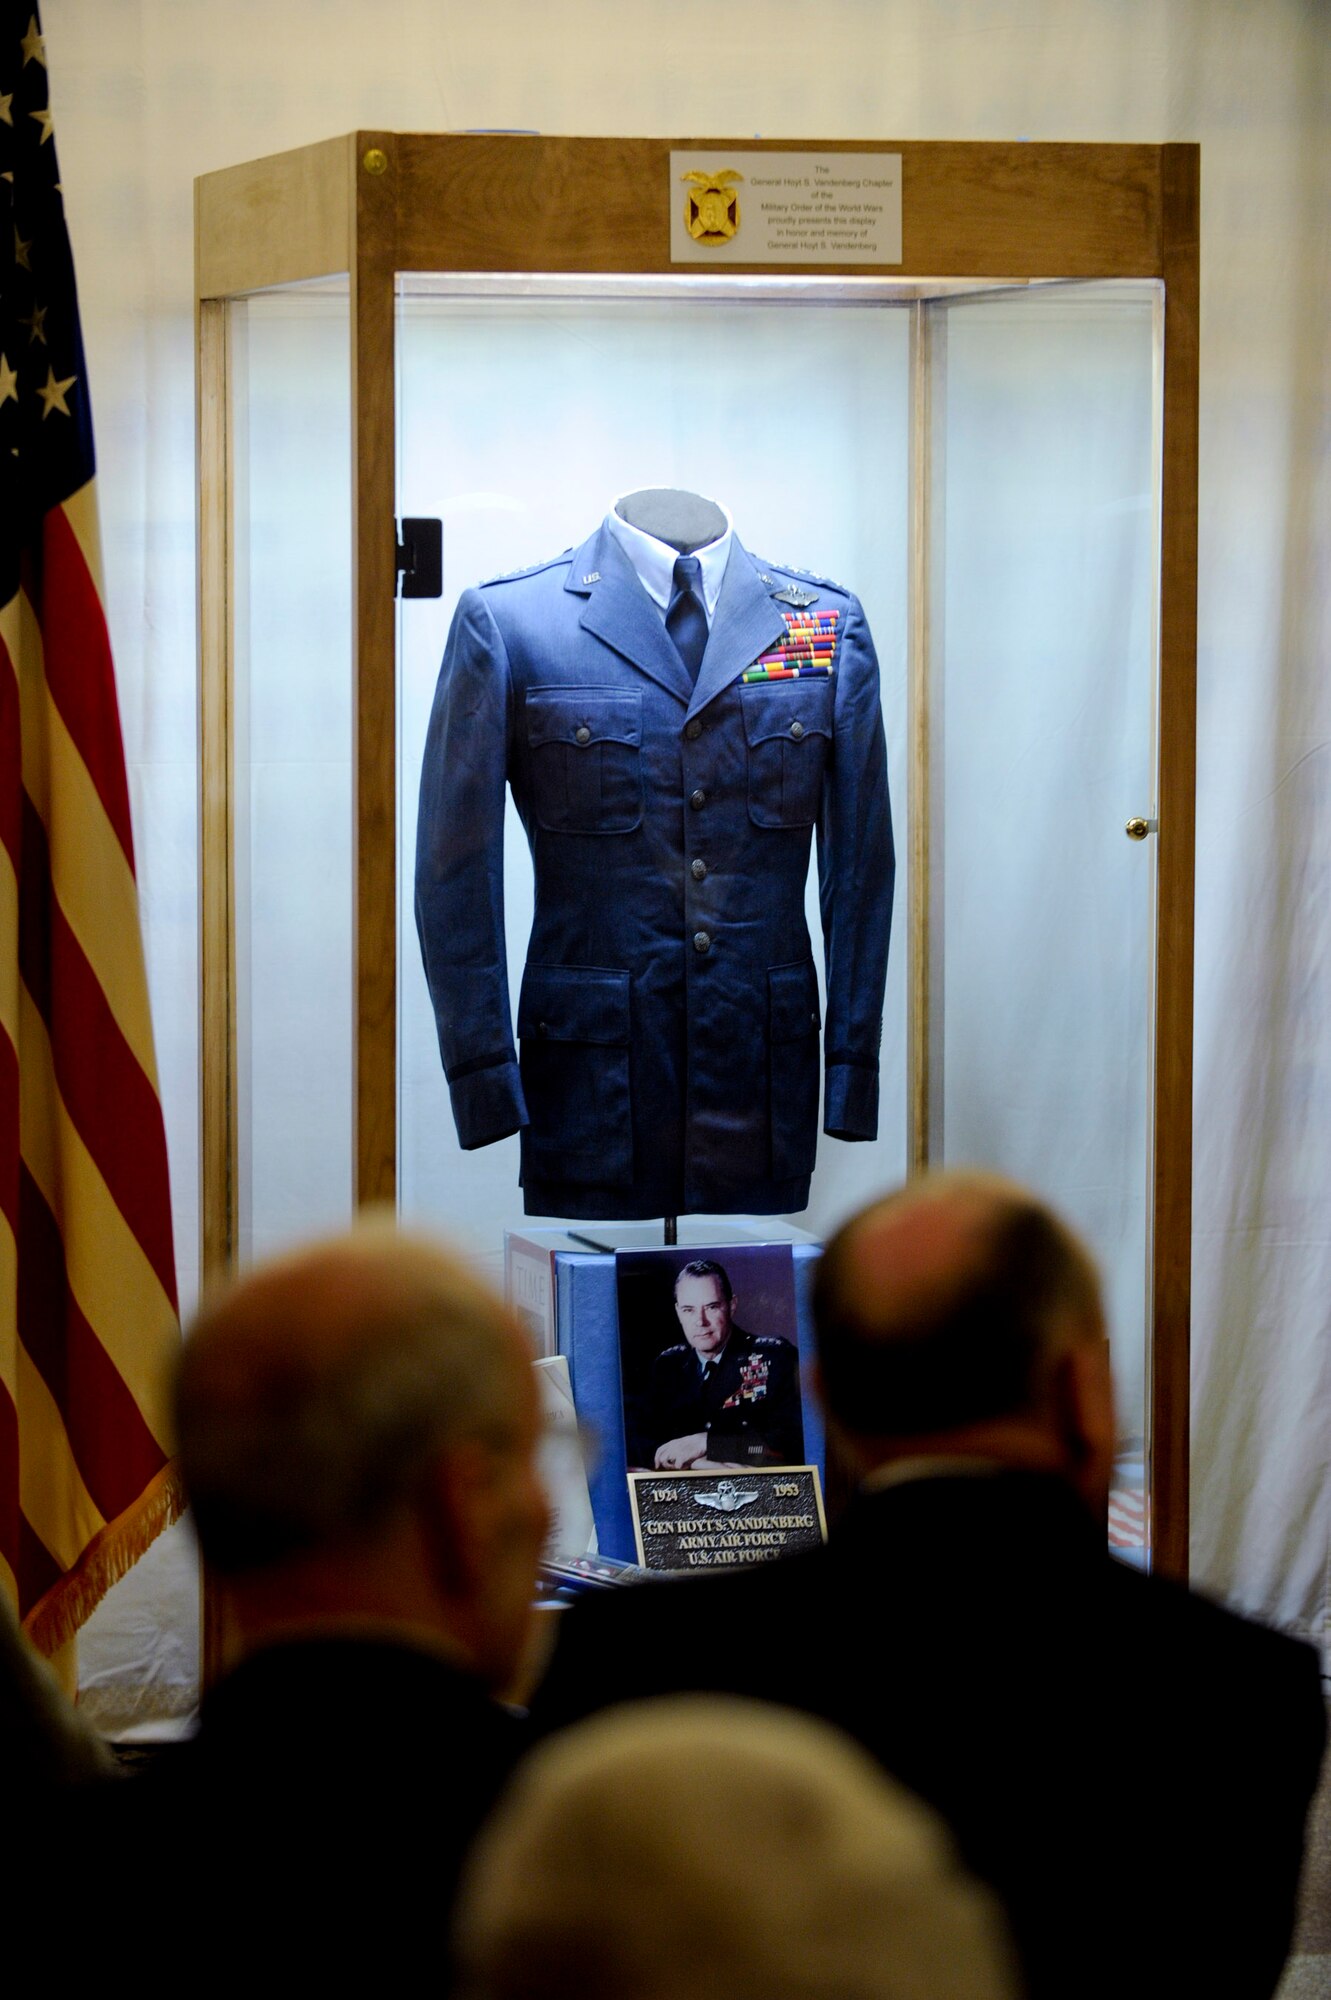 VANDENBERG AIR FORCE BASE, Calif. -- The Gen. Hoyt S. Vandenberg display is unveiled at the Central Coast Veterans Memorial Museum in San Luis Obispo, Calif., Tuesday, Nov. 8, 2011. Maj. Gen. Hoyt S. Vandenberg Jr. donated his father's uniform items to the Vandenberg chapter of the Military Order of World War who then loaned the items to the museum for permanent display. Gen. Vandenberg was the Air Force's second Chief of Staff, is known for officially authorizing the Air Force's blue service dress and has Vandenberg Air Force Base named after him. (U.S. Air Force photo/Staff Sgt. Levi Riendeau)
